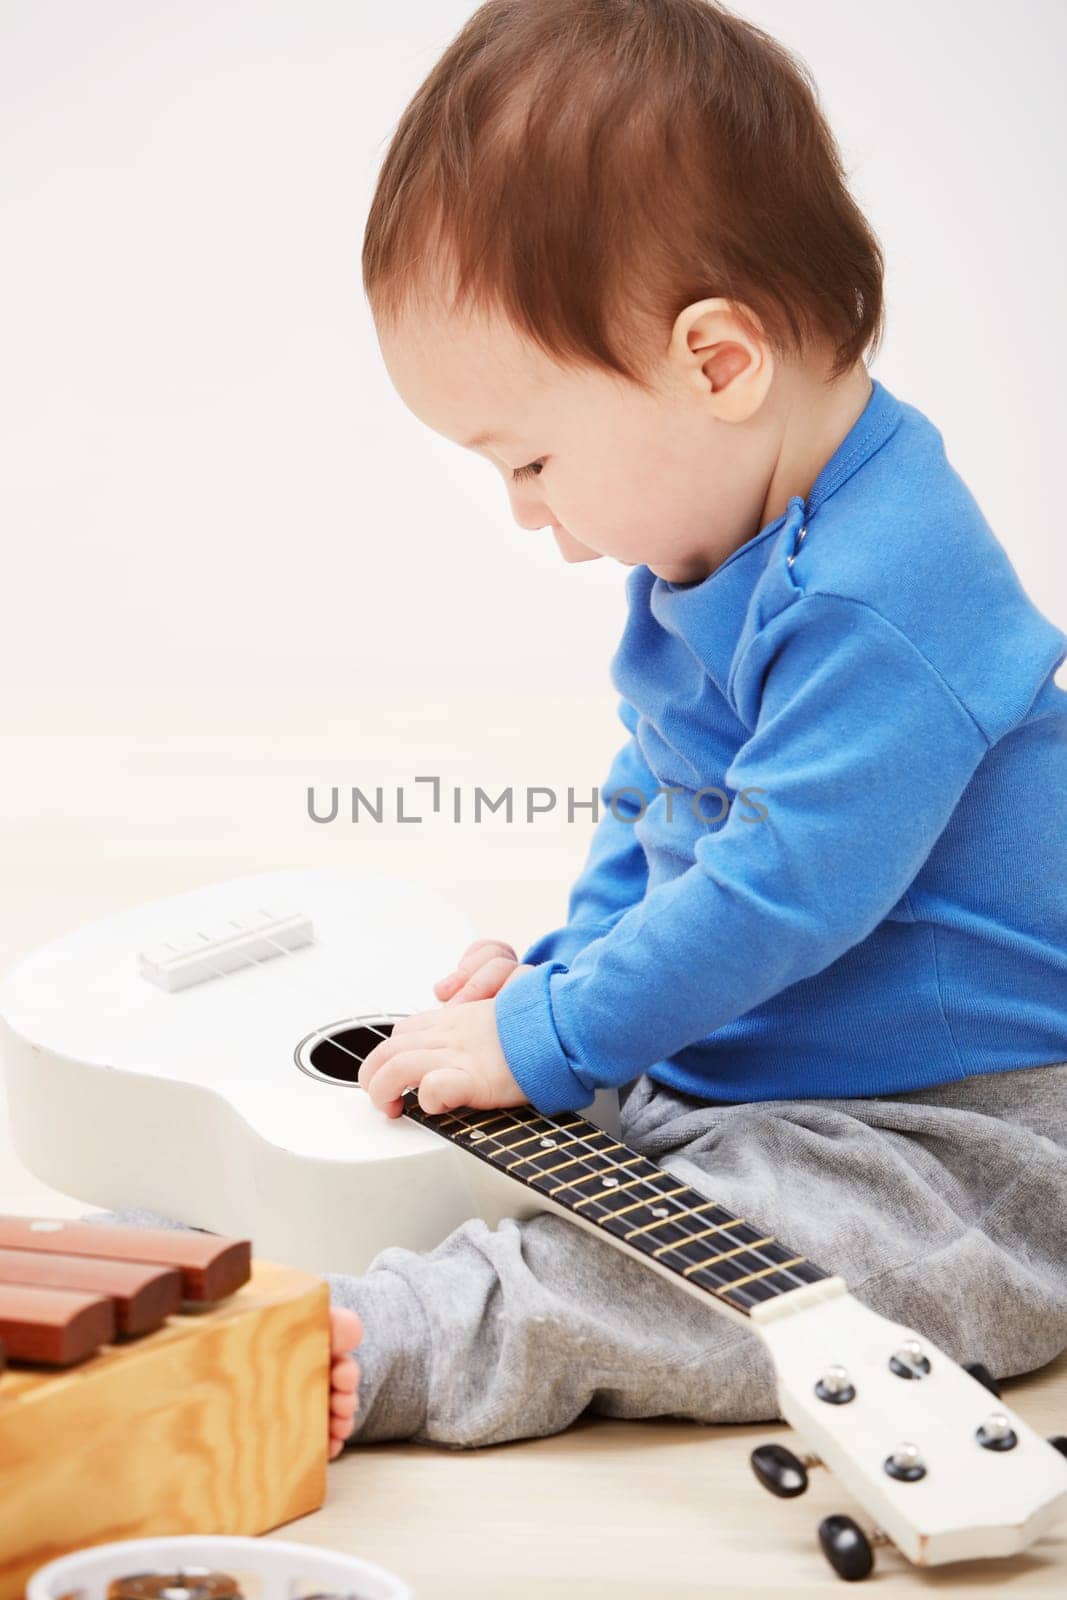 Baby, guitar toys and play in home for entertainment joy, childhood development or education. Boy, kid and instruments for musical strings for song learning in apartment or growing, progress or games.